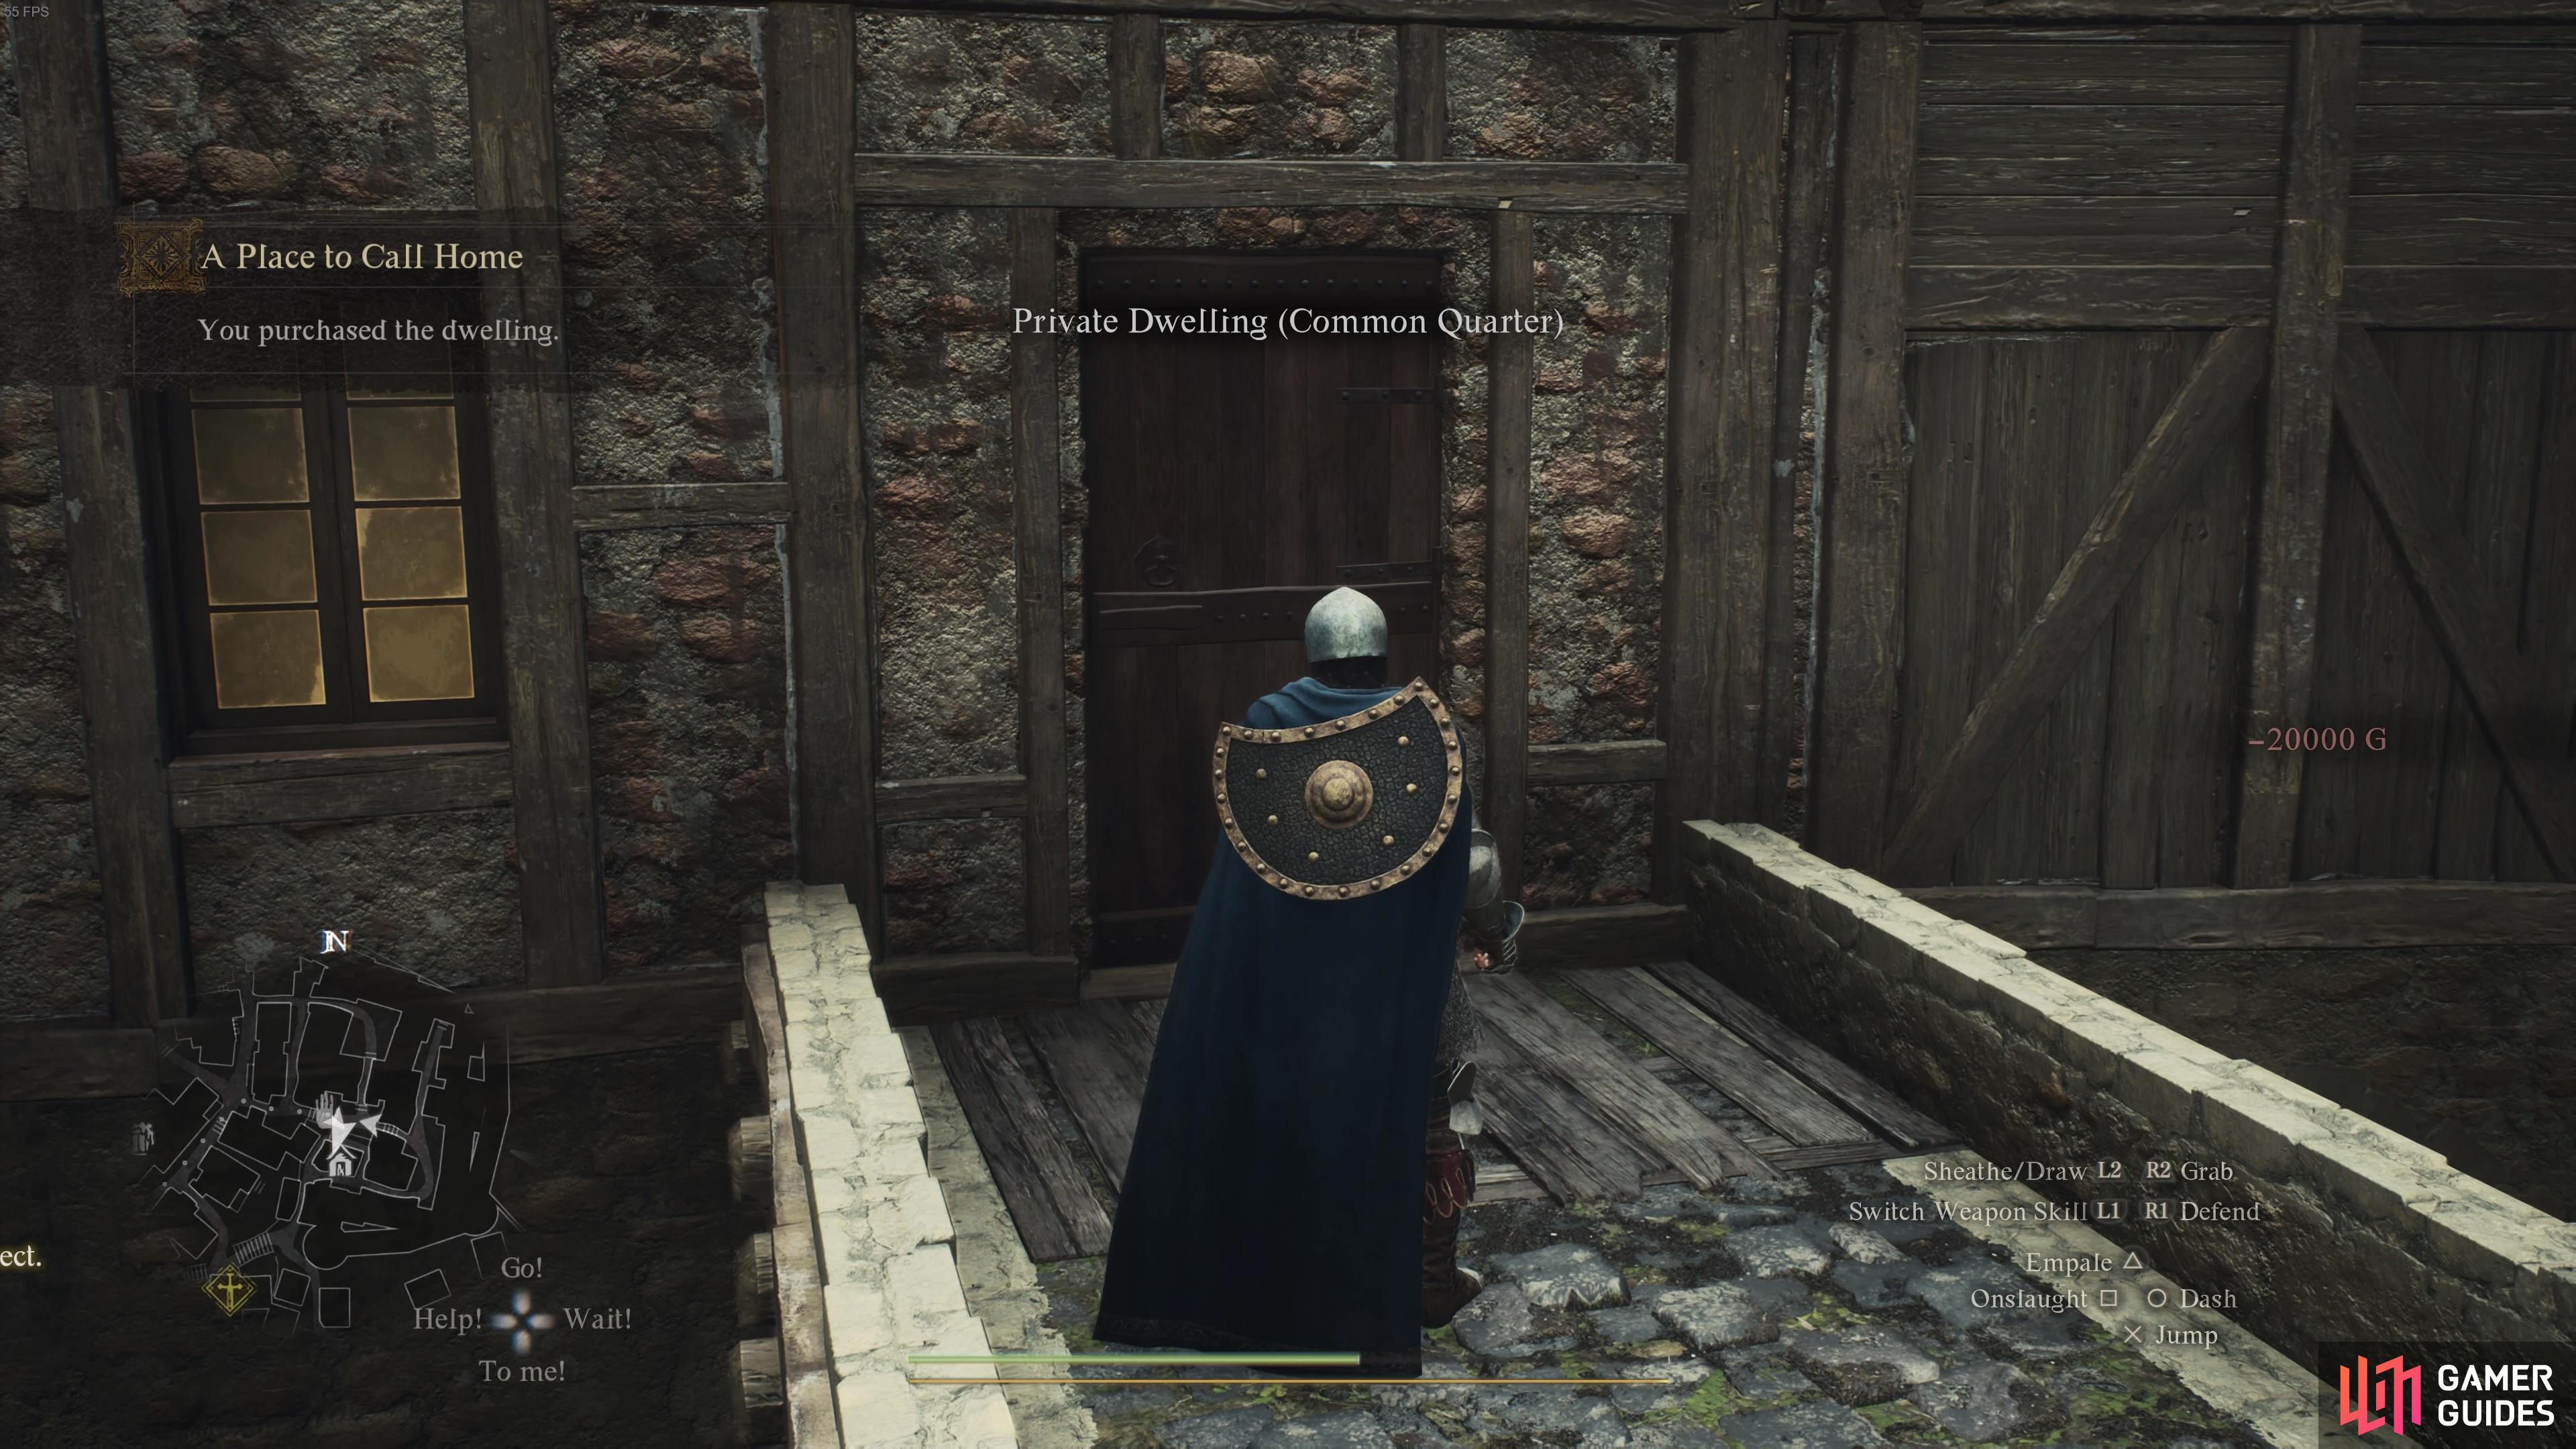 The A Place to Call Home Quest in Dragon’s Dogma 2 allows you to purchase your own home.